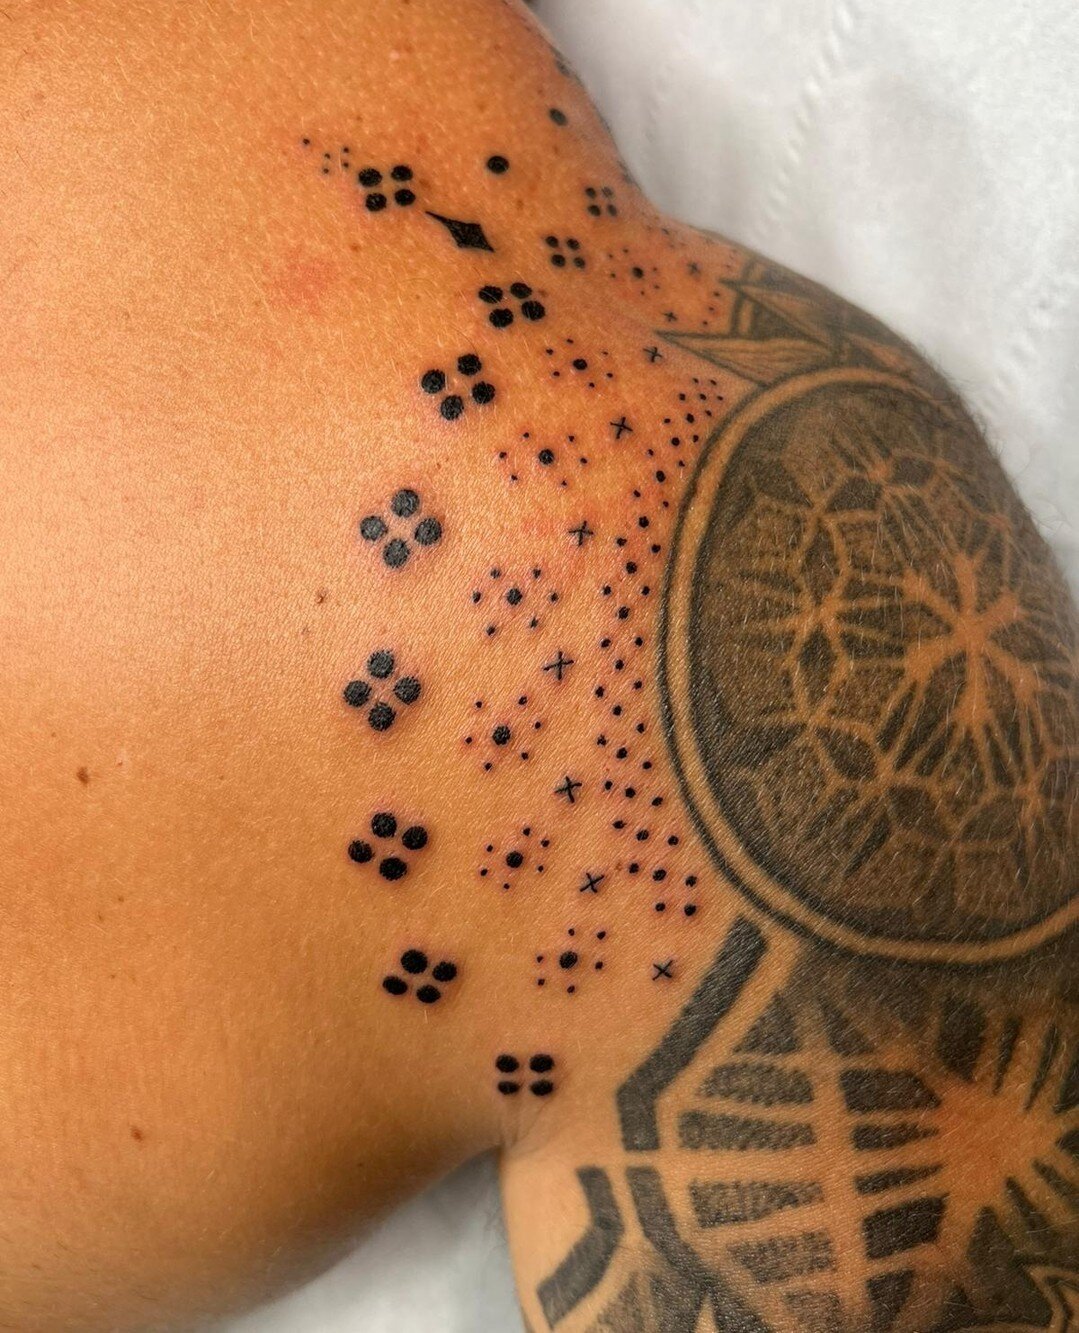 Ornamental additions to a pre-existing sleeve by @tahsenaalam @scorpiomarstattoo 🦂❤️⁠
⁠
⁠
⁠
⁠
#londontattoo #tashenaalam #scorpiomarstattoo #ornamentaltattoo #dotwork #adornment #tattoo #asianstyle